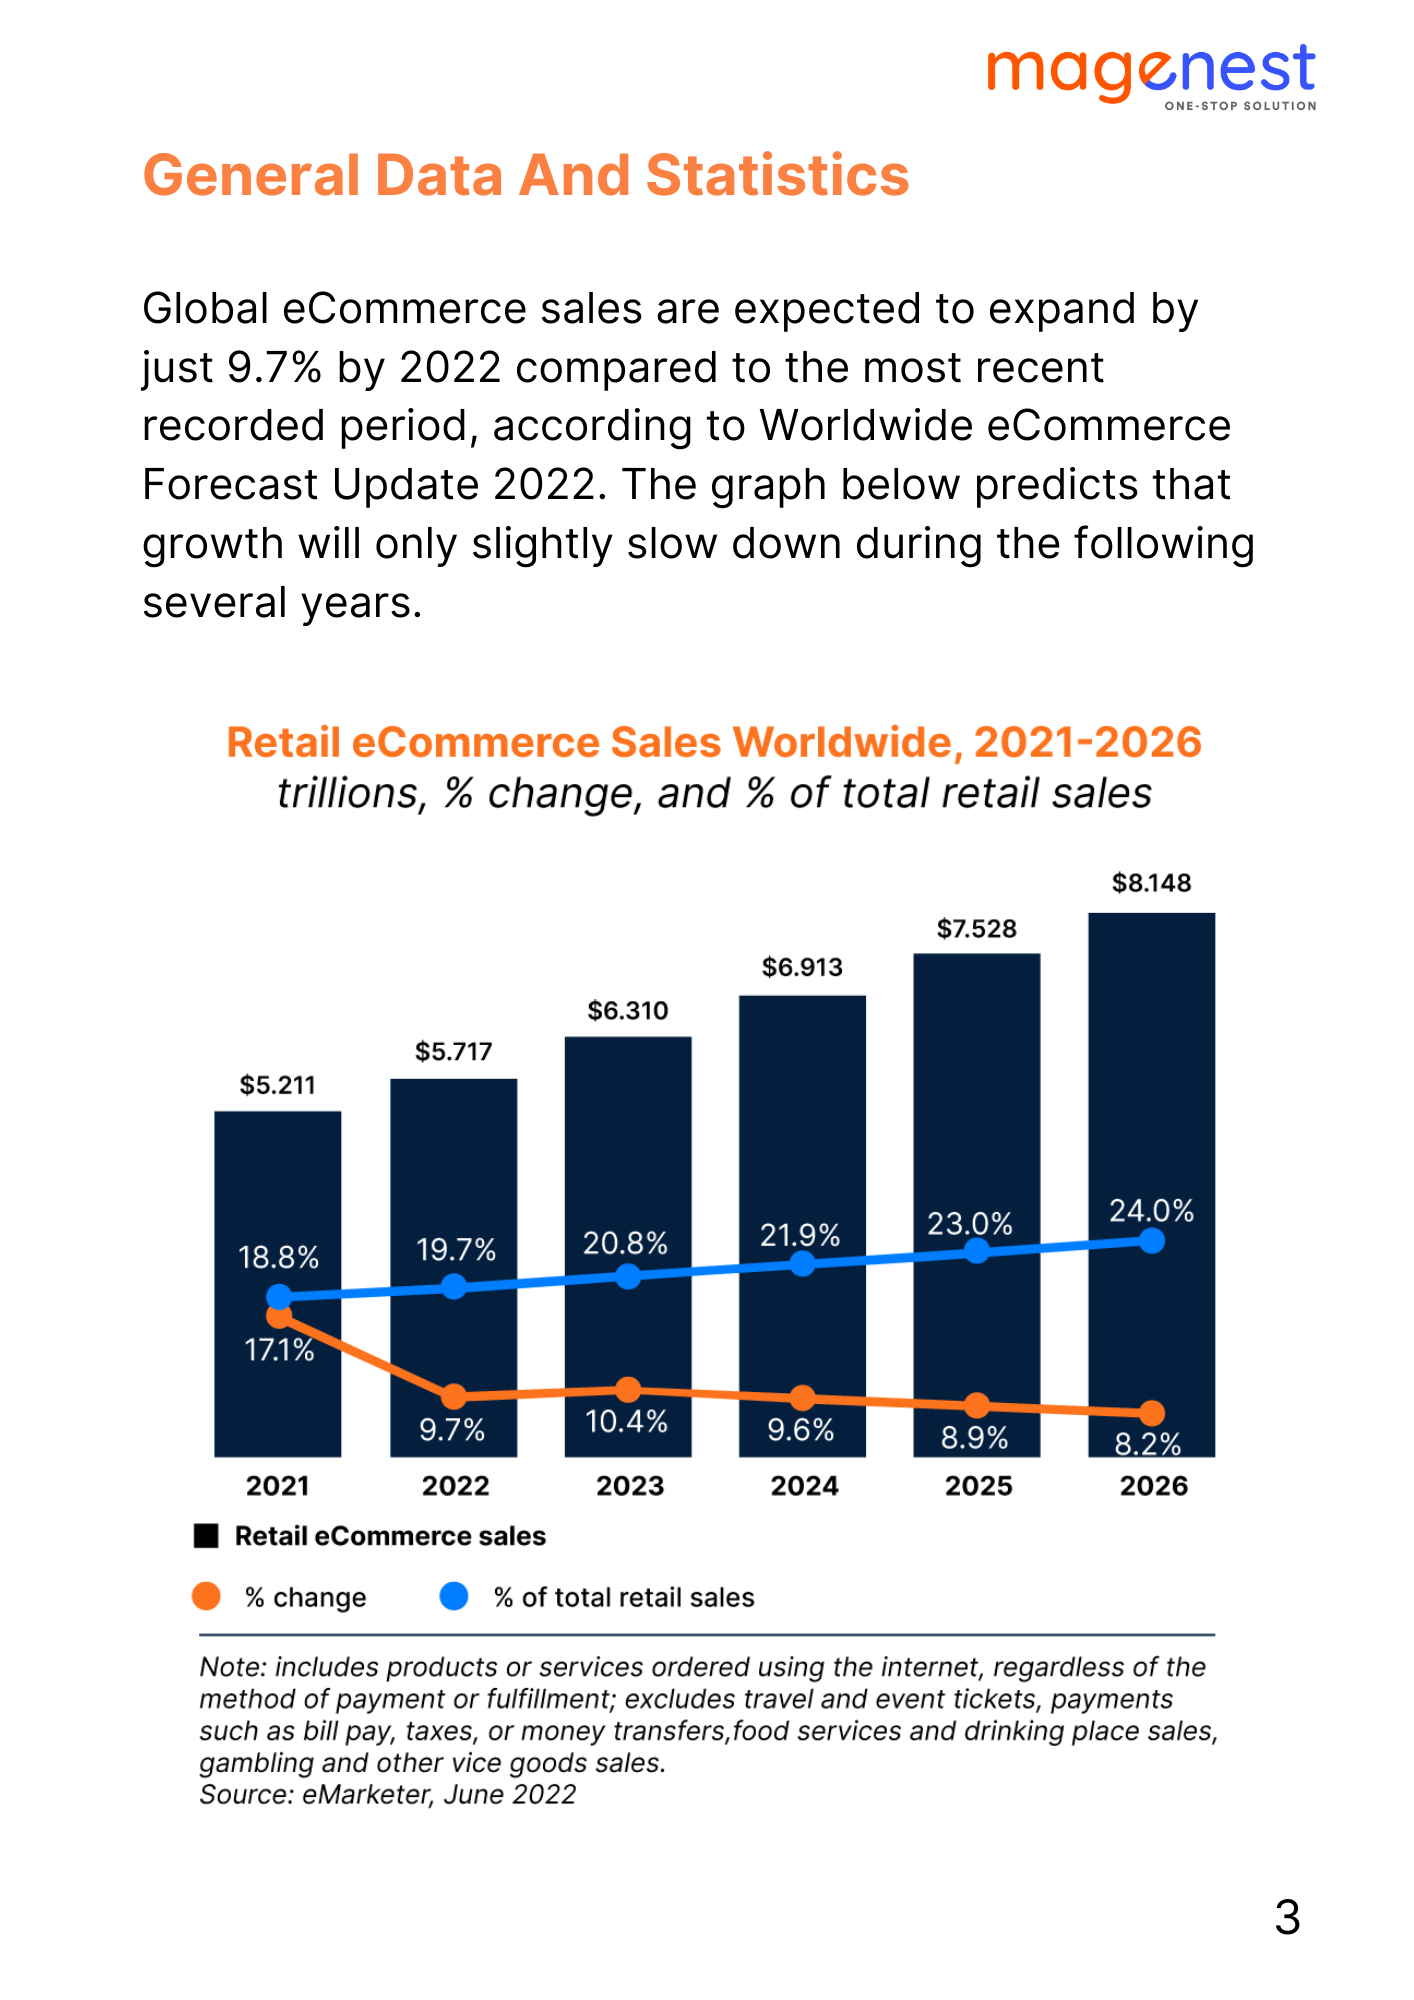 eBook: eCommerce Statistics 2022 and the Trends You Need to Know1